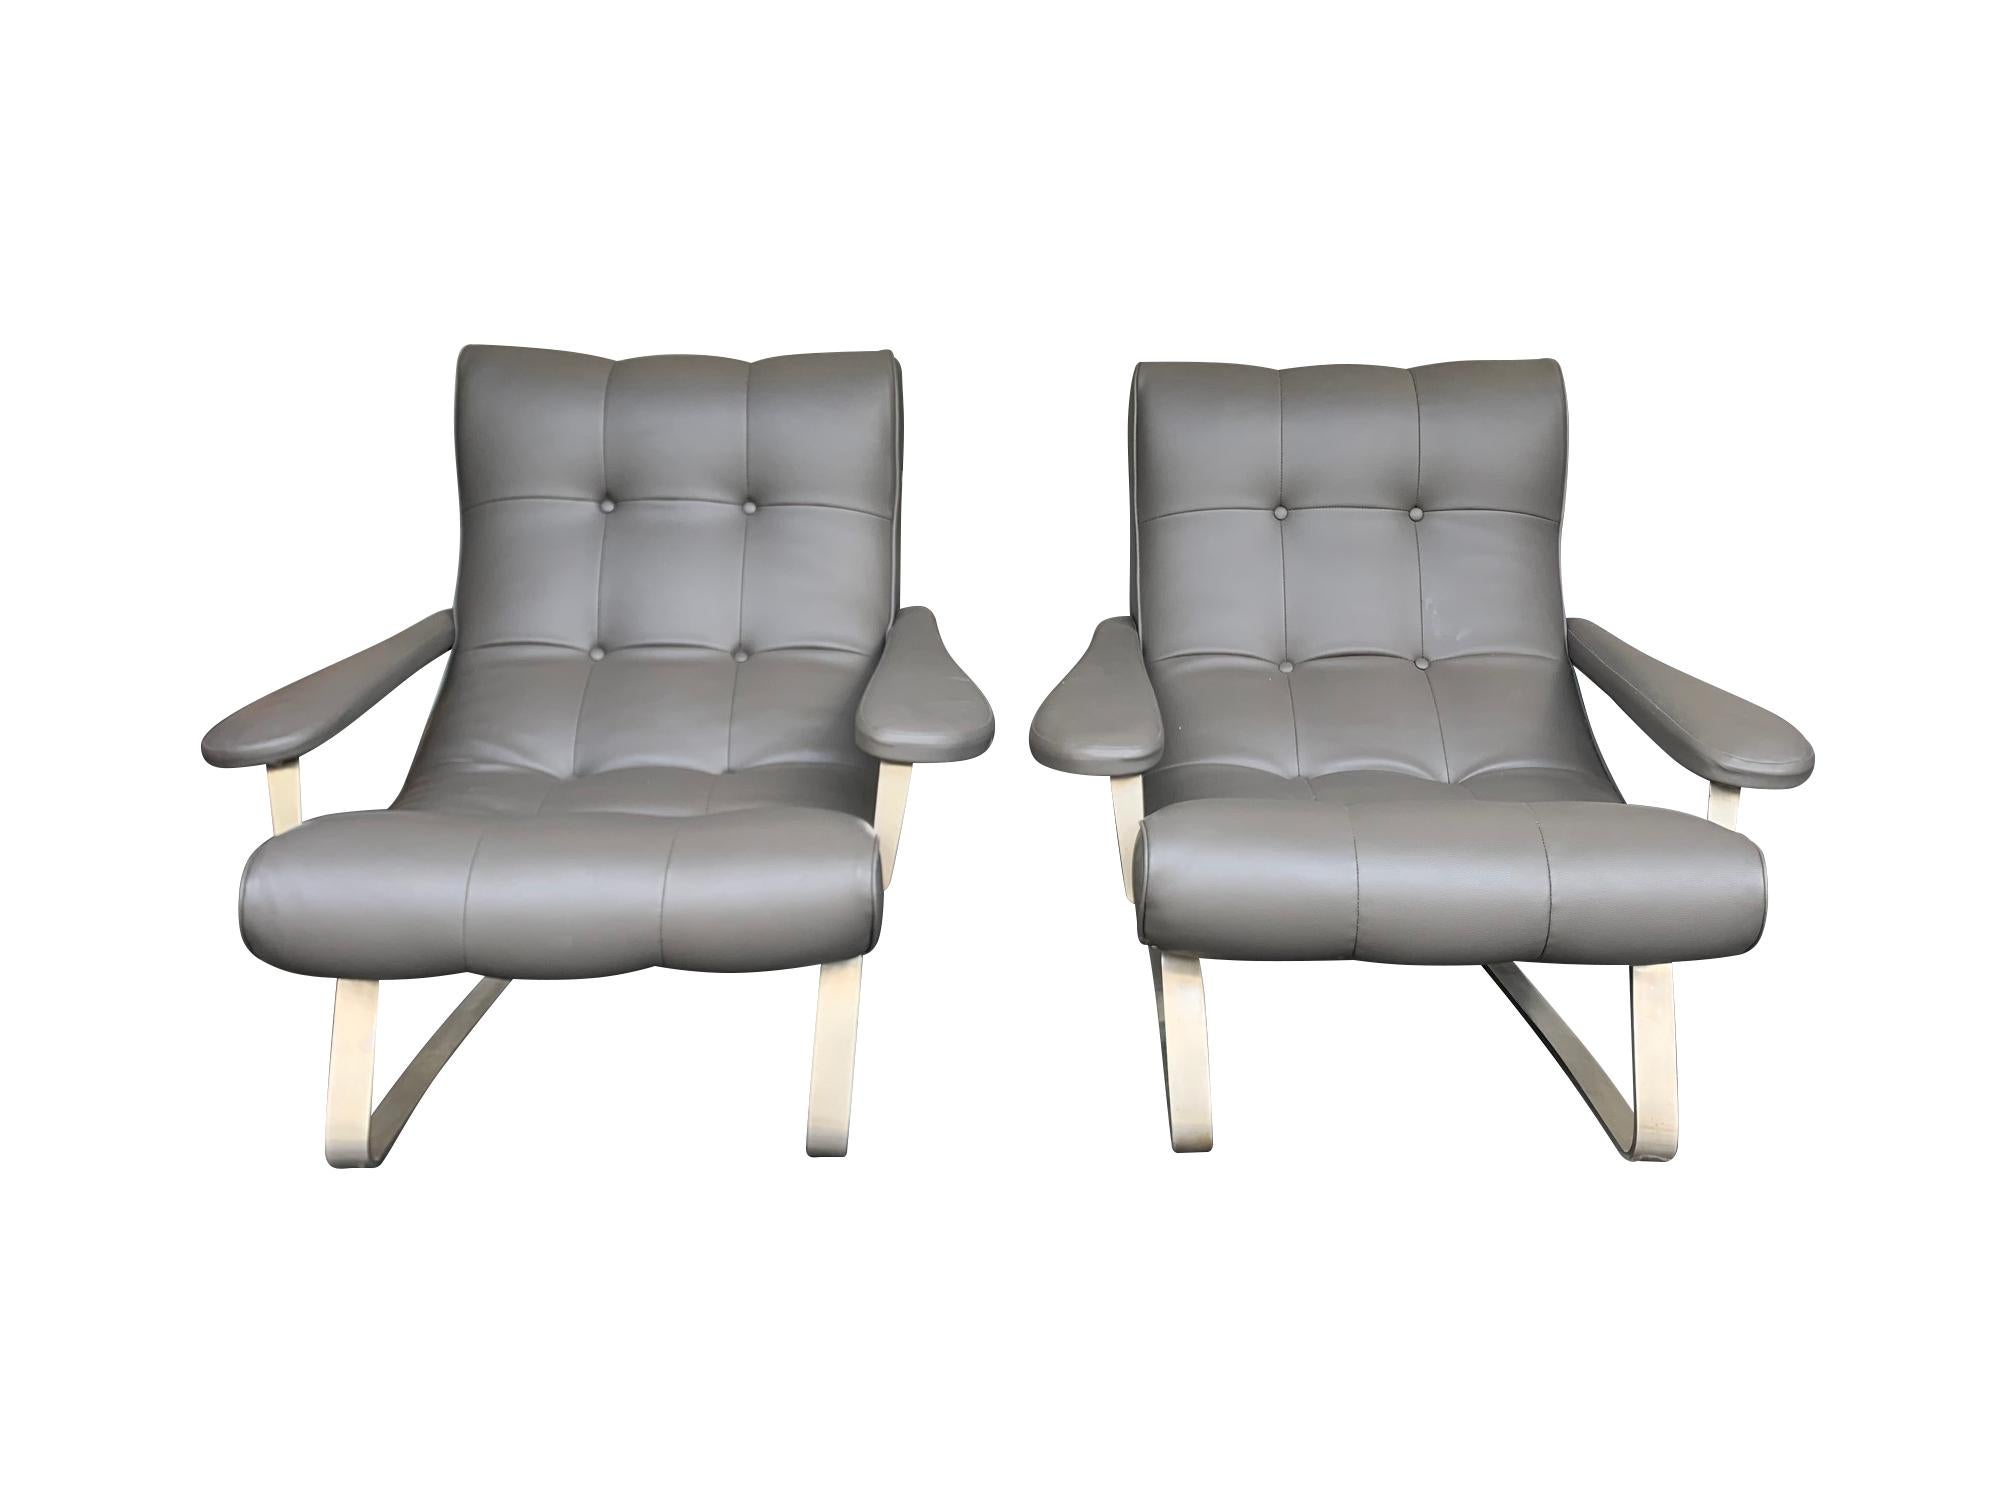 Unusual Pair of Italian 1970s Cantilevered Armchairs with Brushed Metal Legs 2